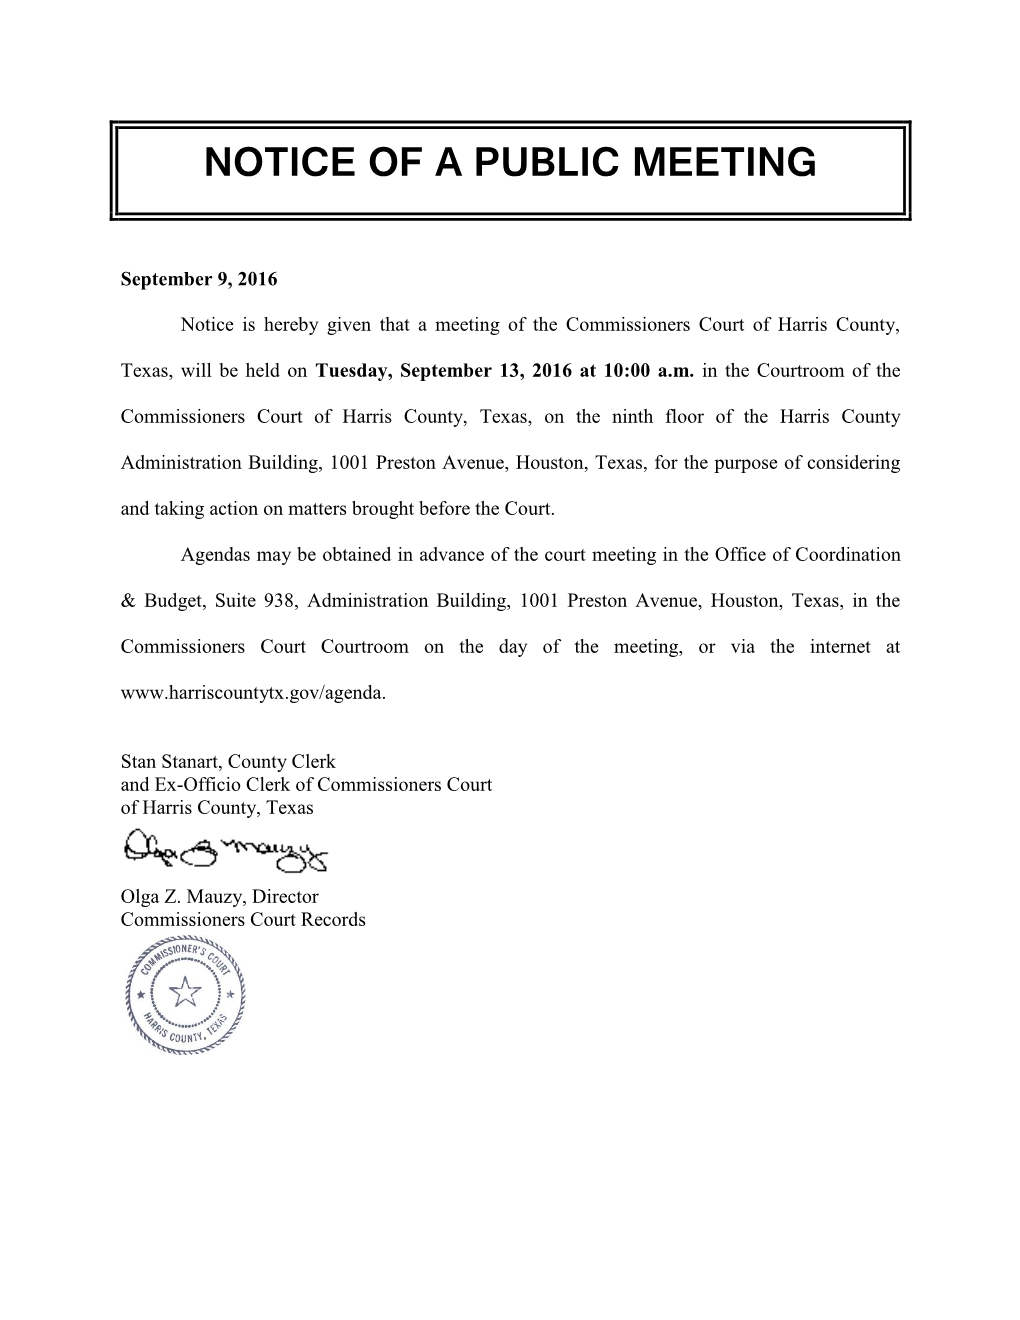 Notice of a Public Meeting